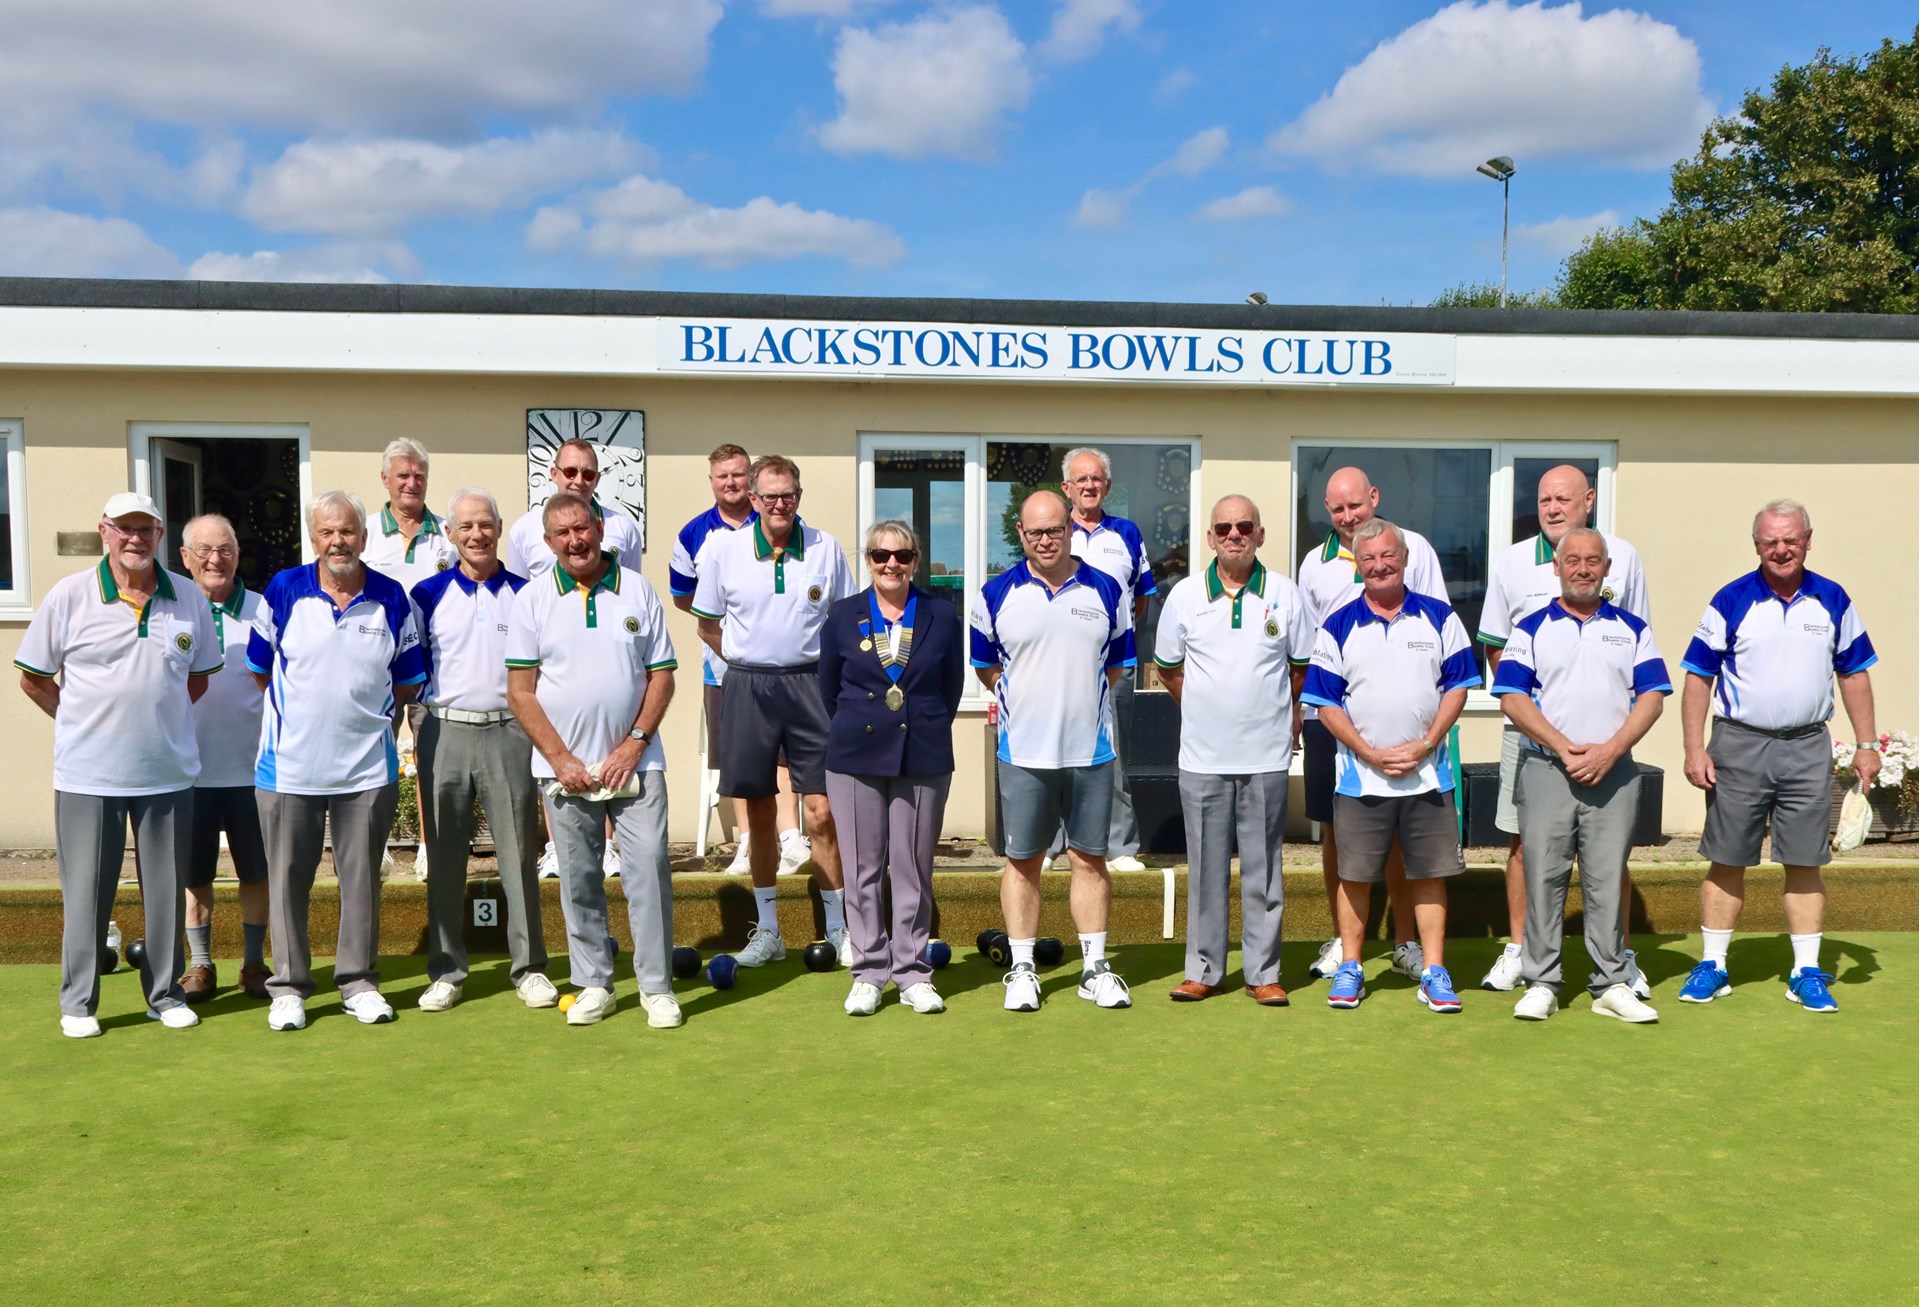 The two competing teams, Blackstones and Oakham, before the start of play, with President Rita Downs